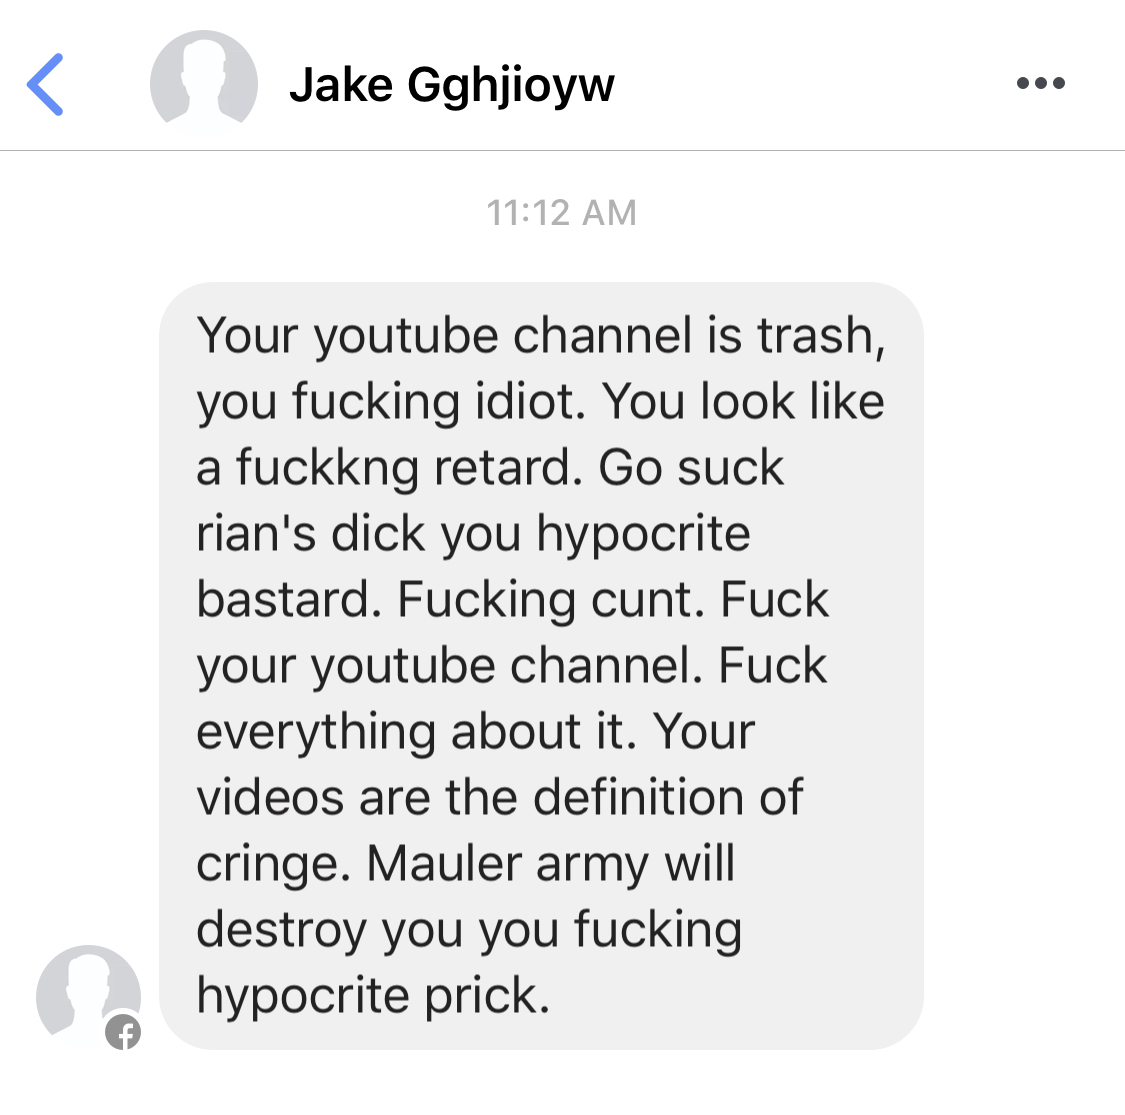 Shoutout to this guy who's so mad I liked a 2-year old Star Wars movie he apparently made a Facebook account just to send me this message